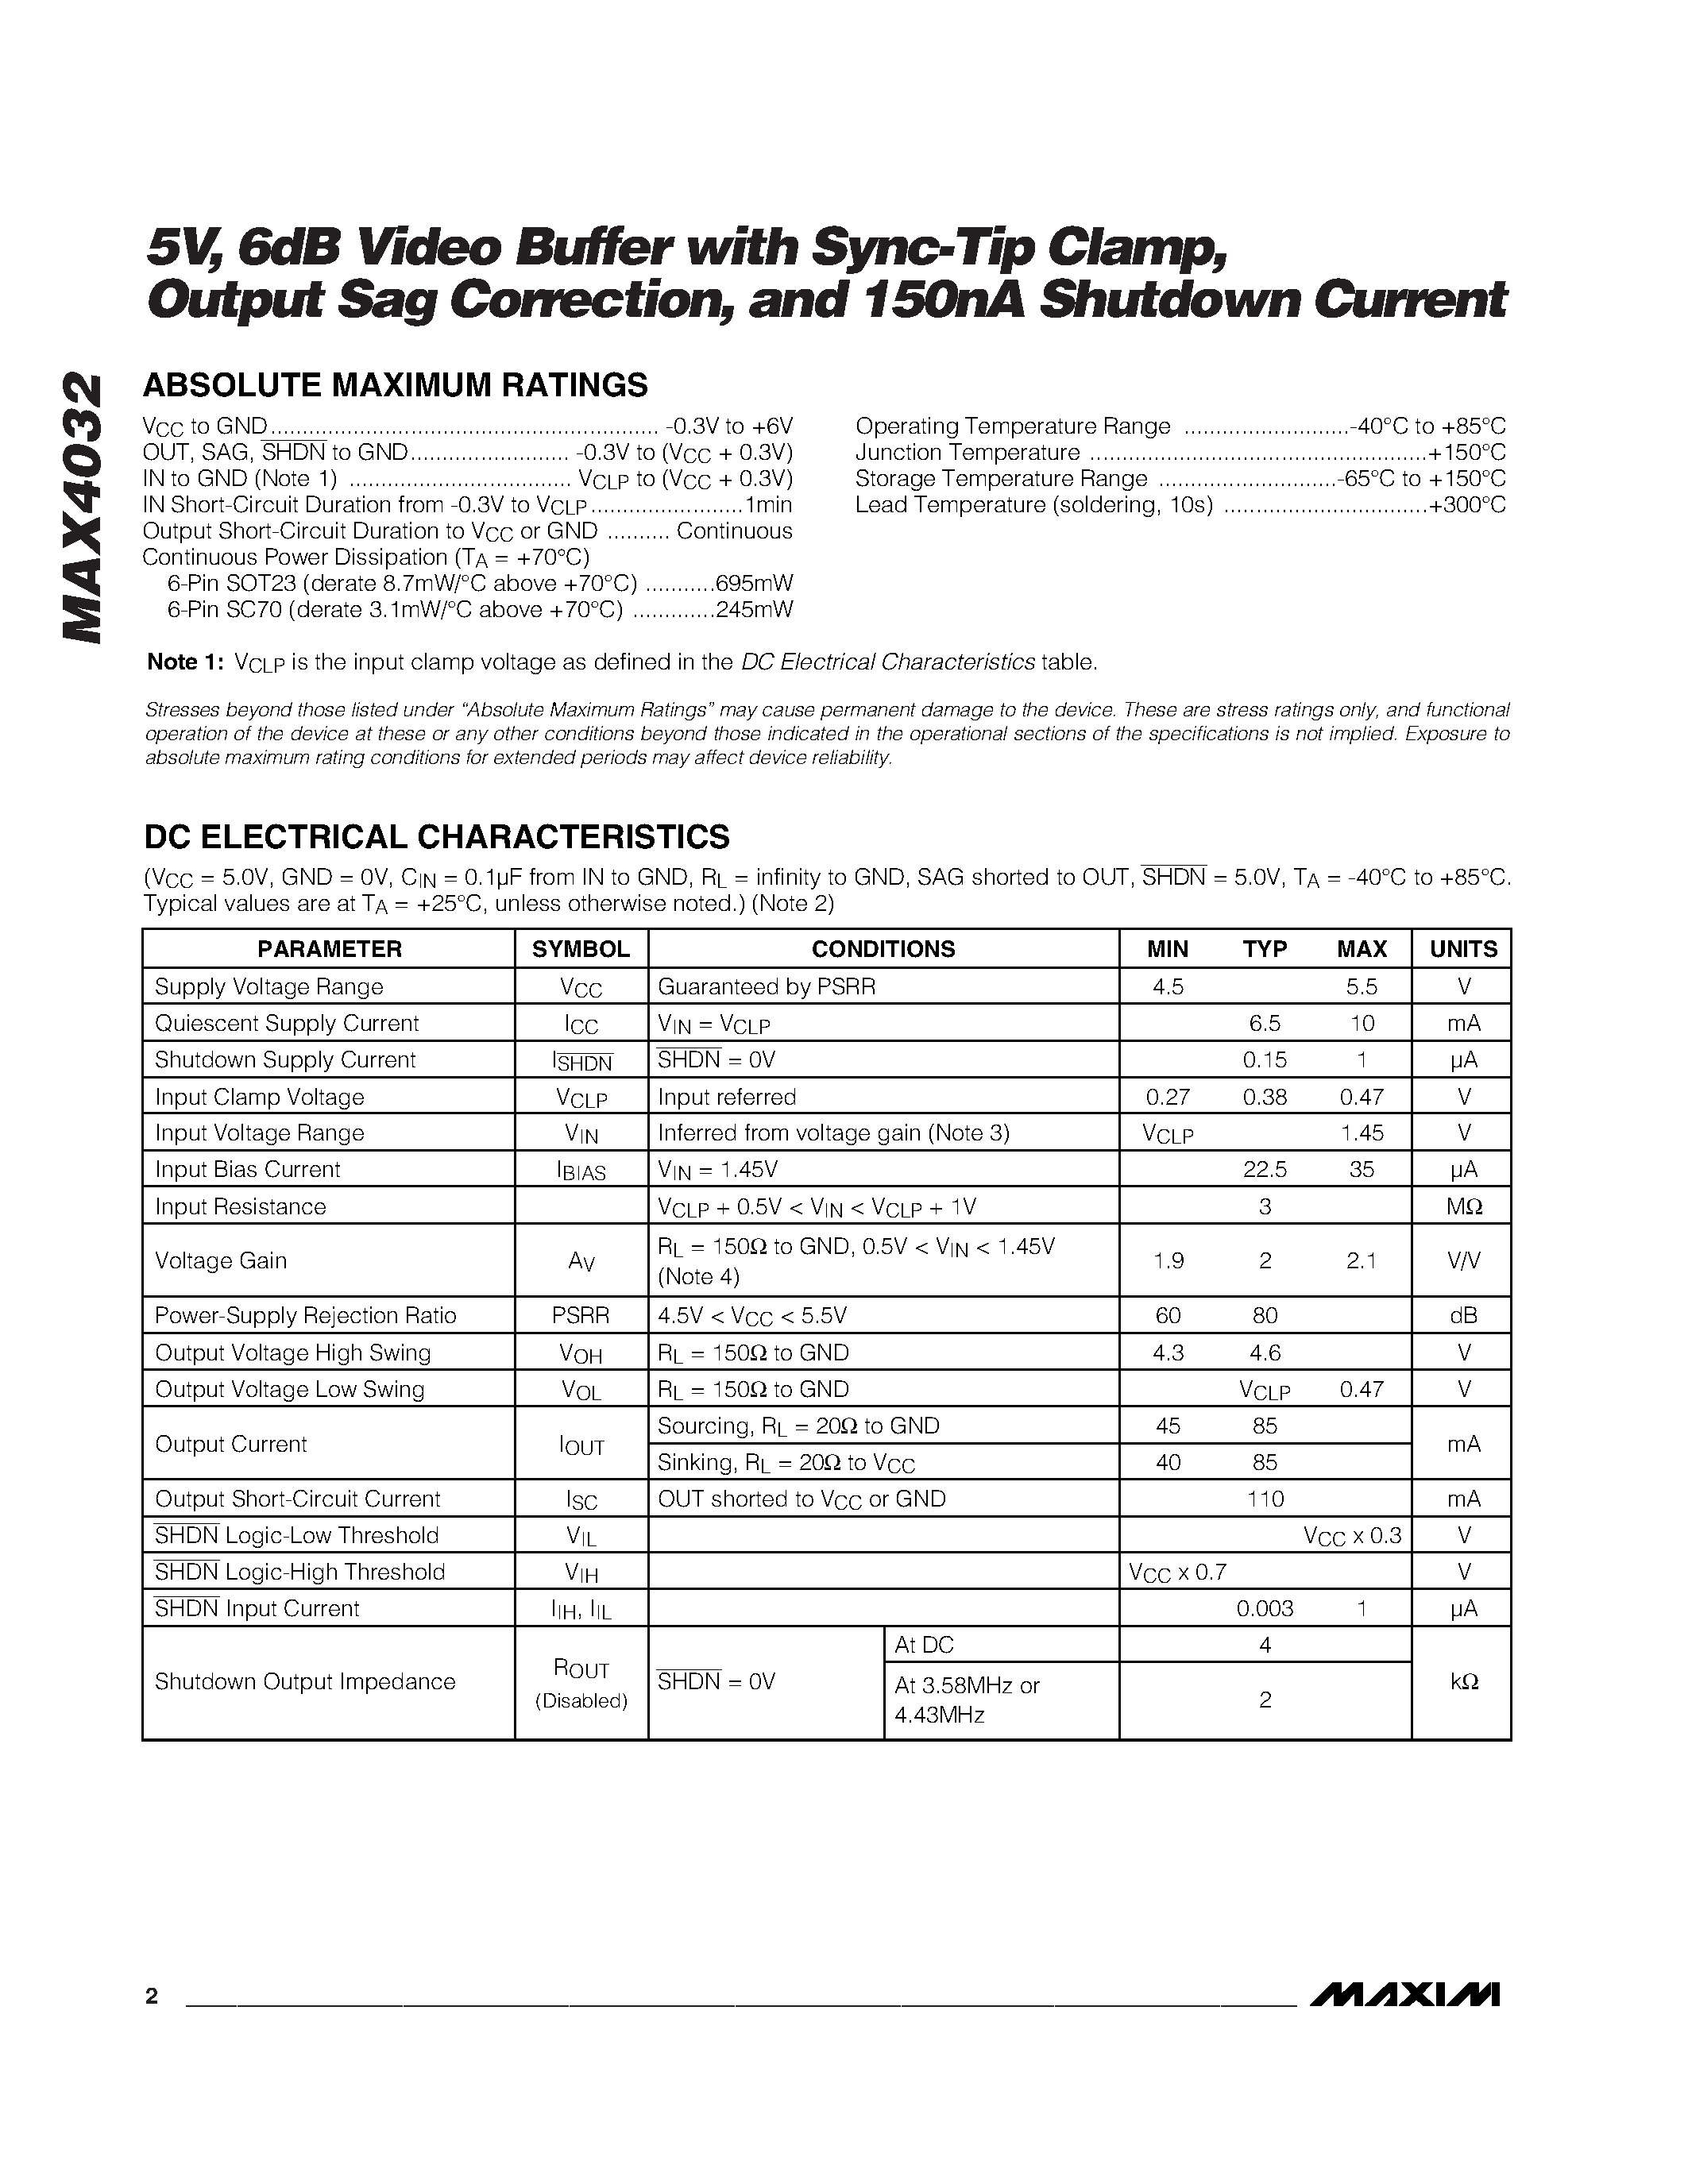 Datasheet MAX4032 - 5V / 6dB Video Buffer with Sync-Tip Clamp / Output Sag Correction / and 150nA Shutdown Current page 2